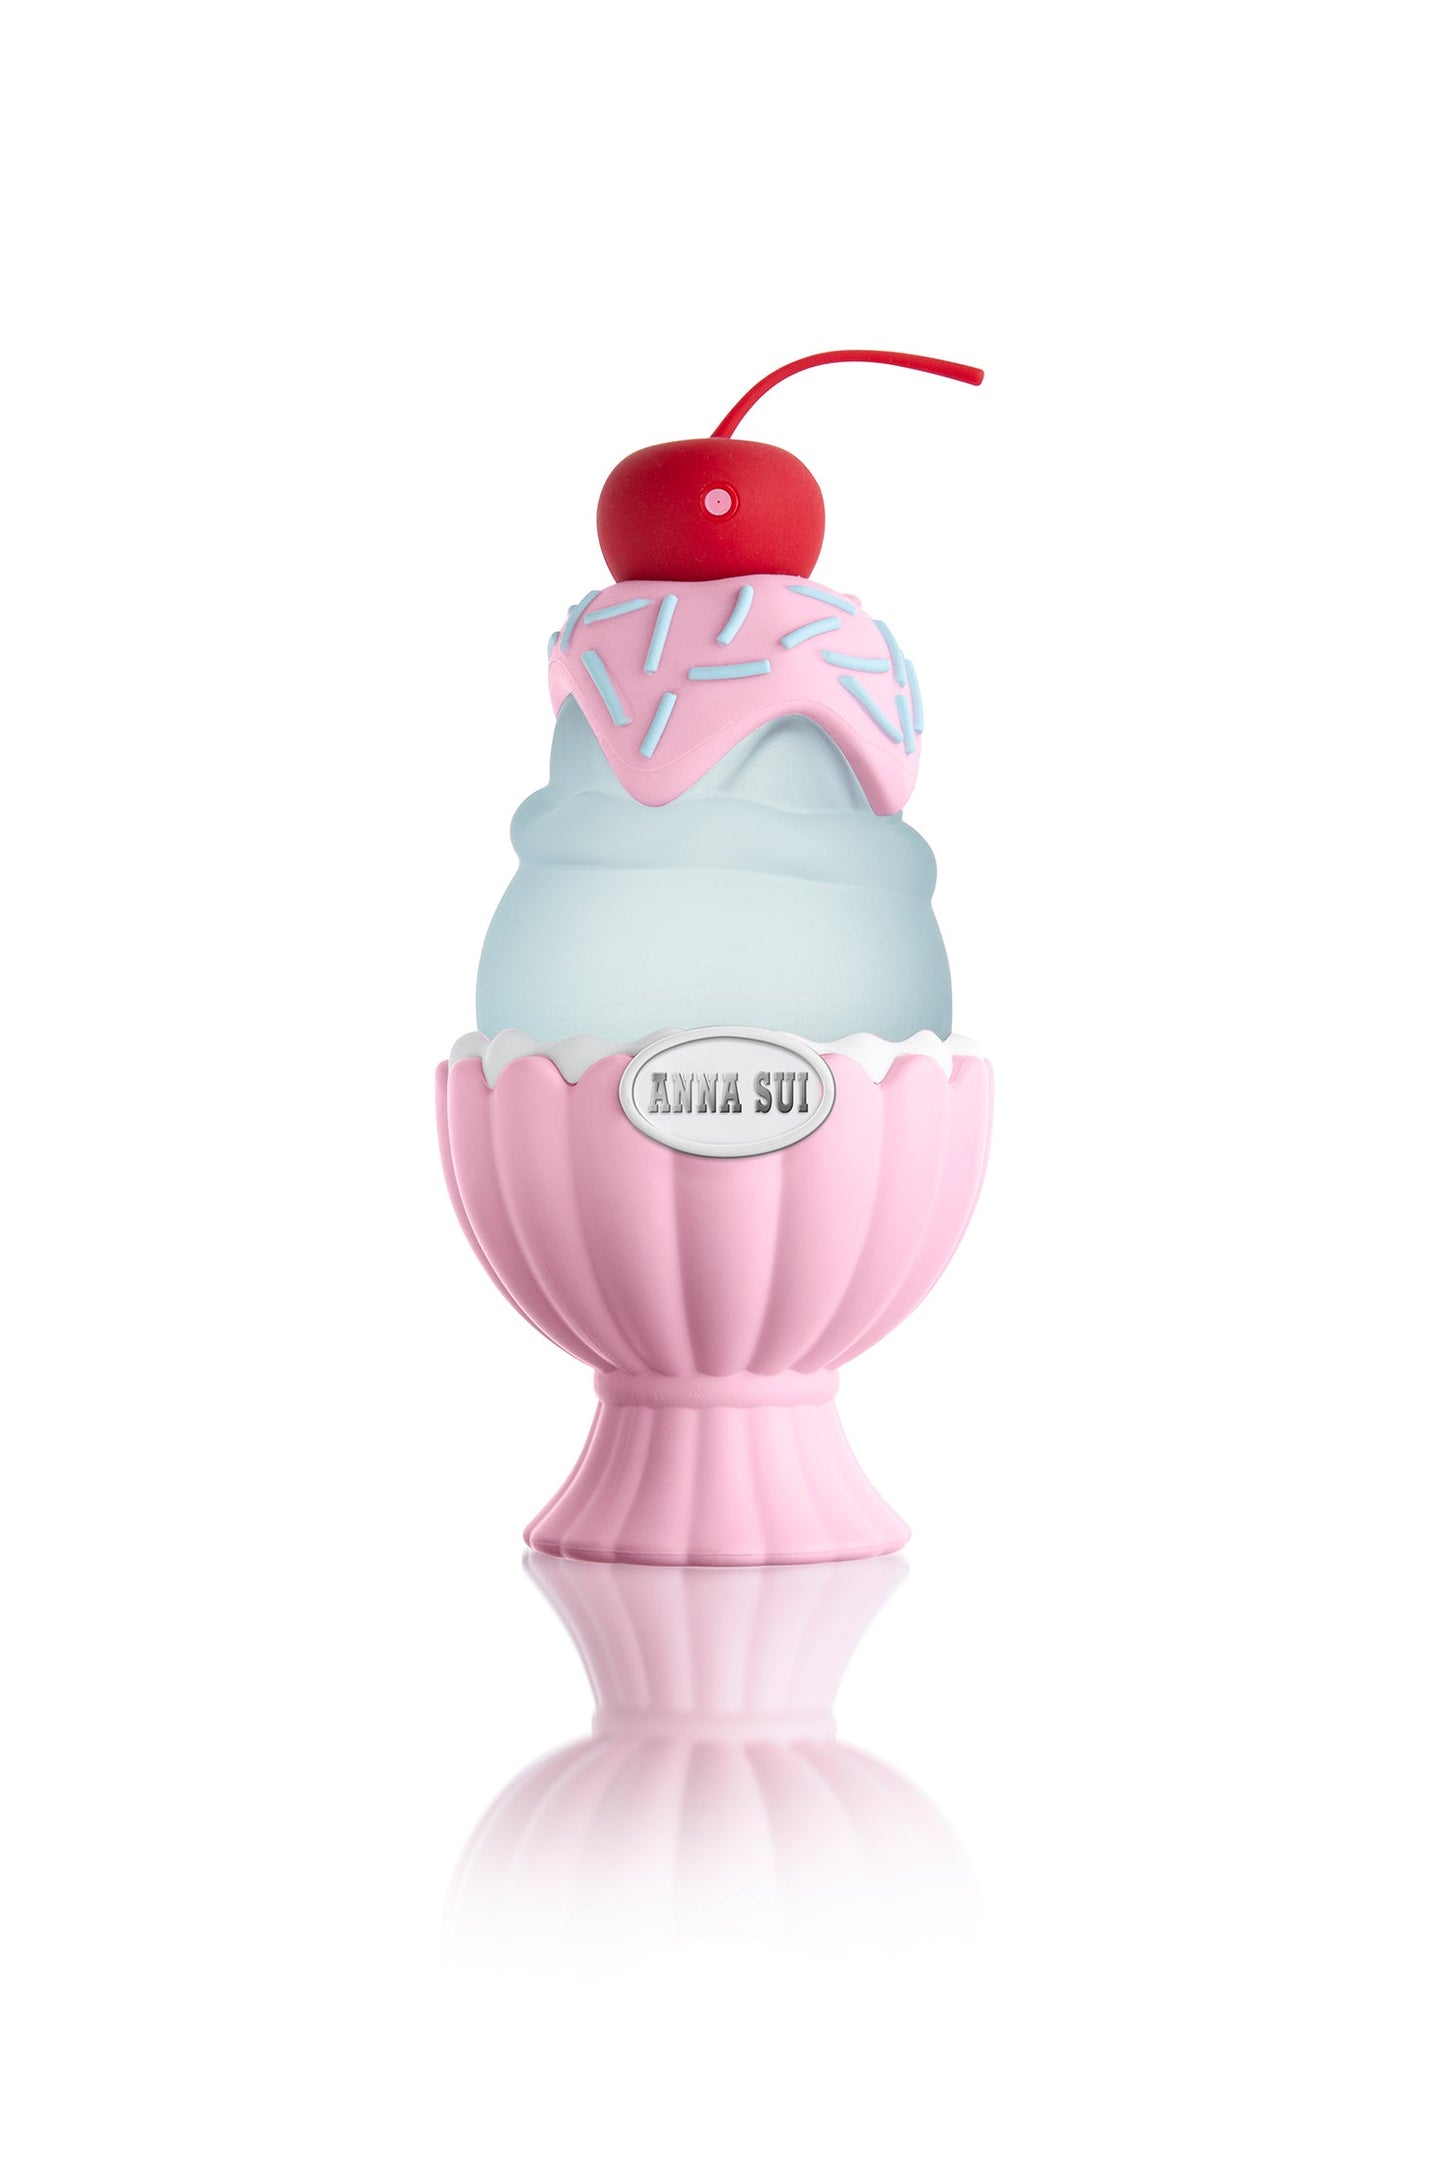 It comes in a sundae pink bottle with a shell at the bottom and blue ice cream a cherry on top